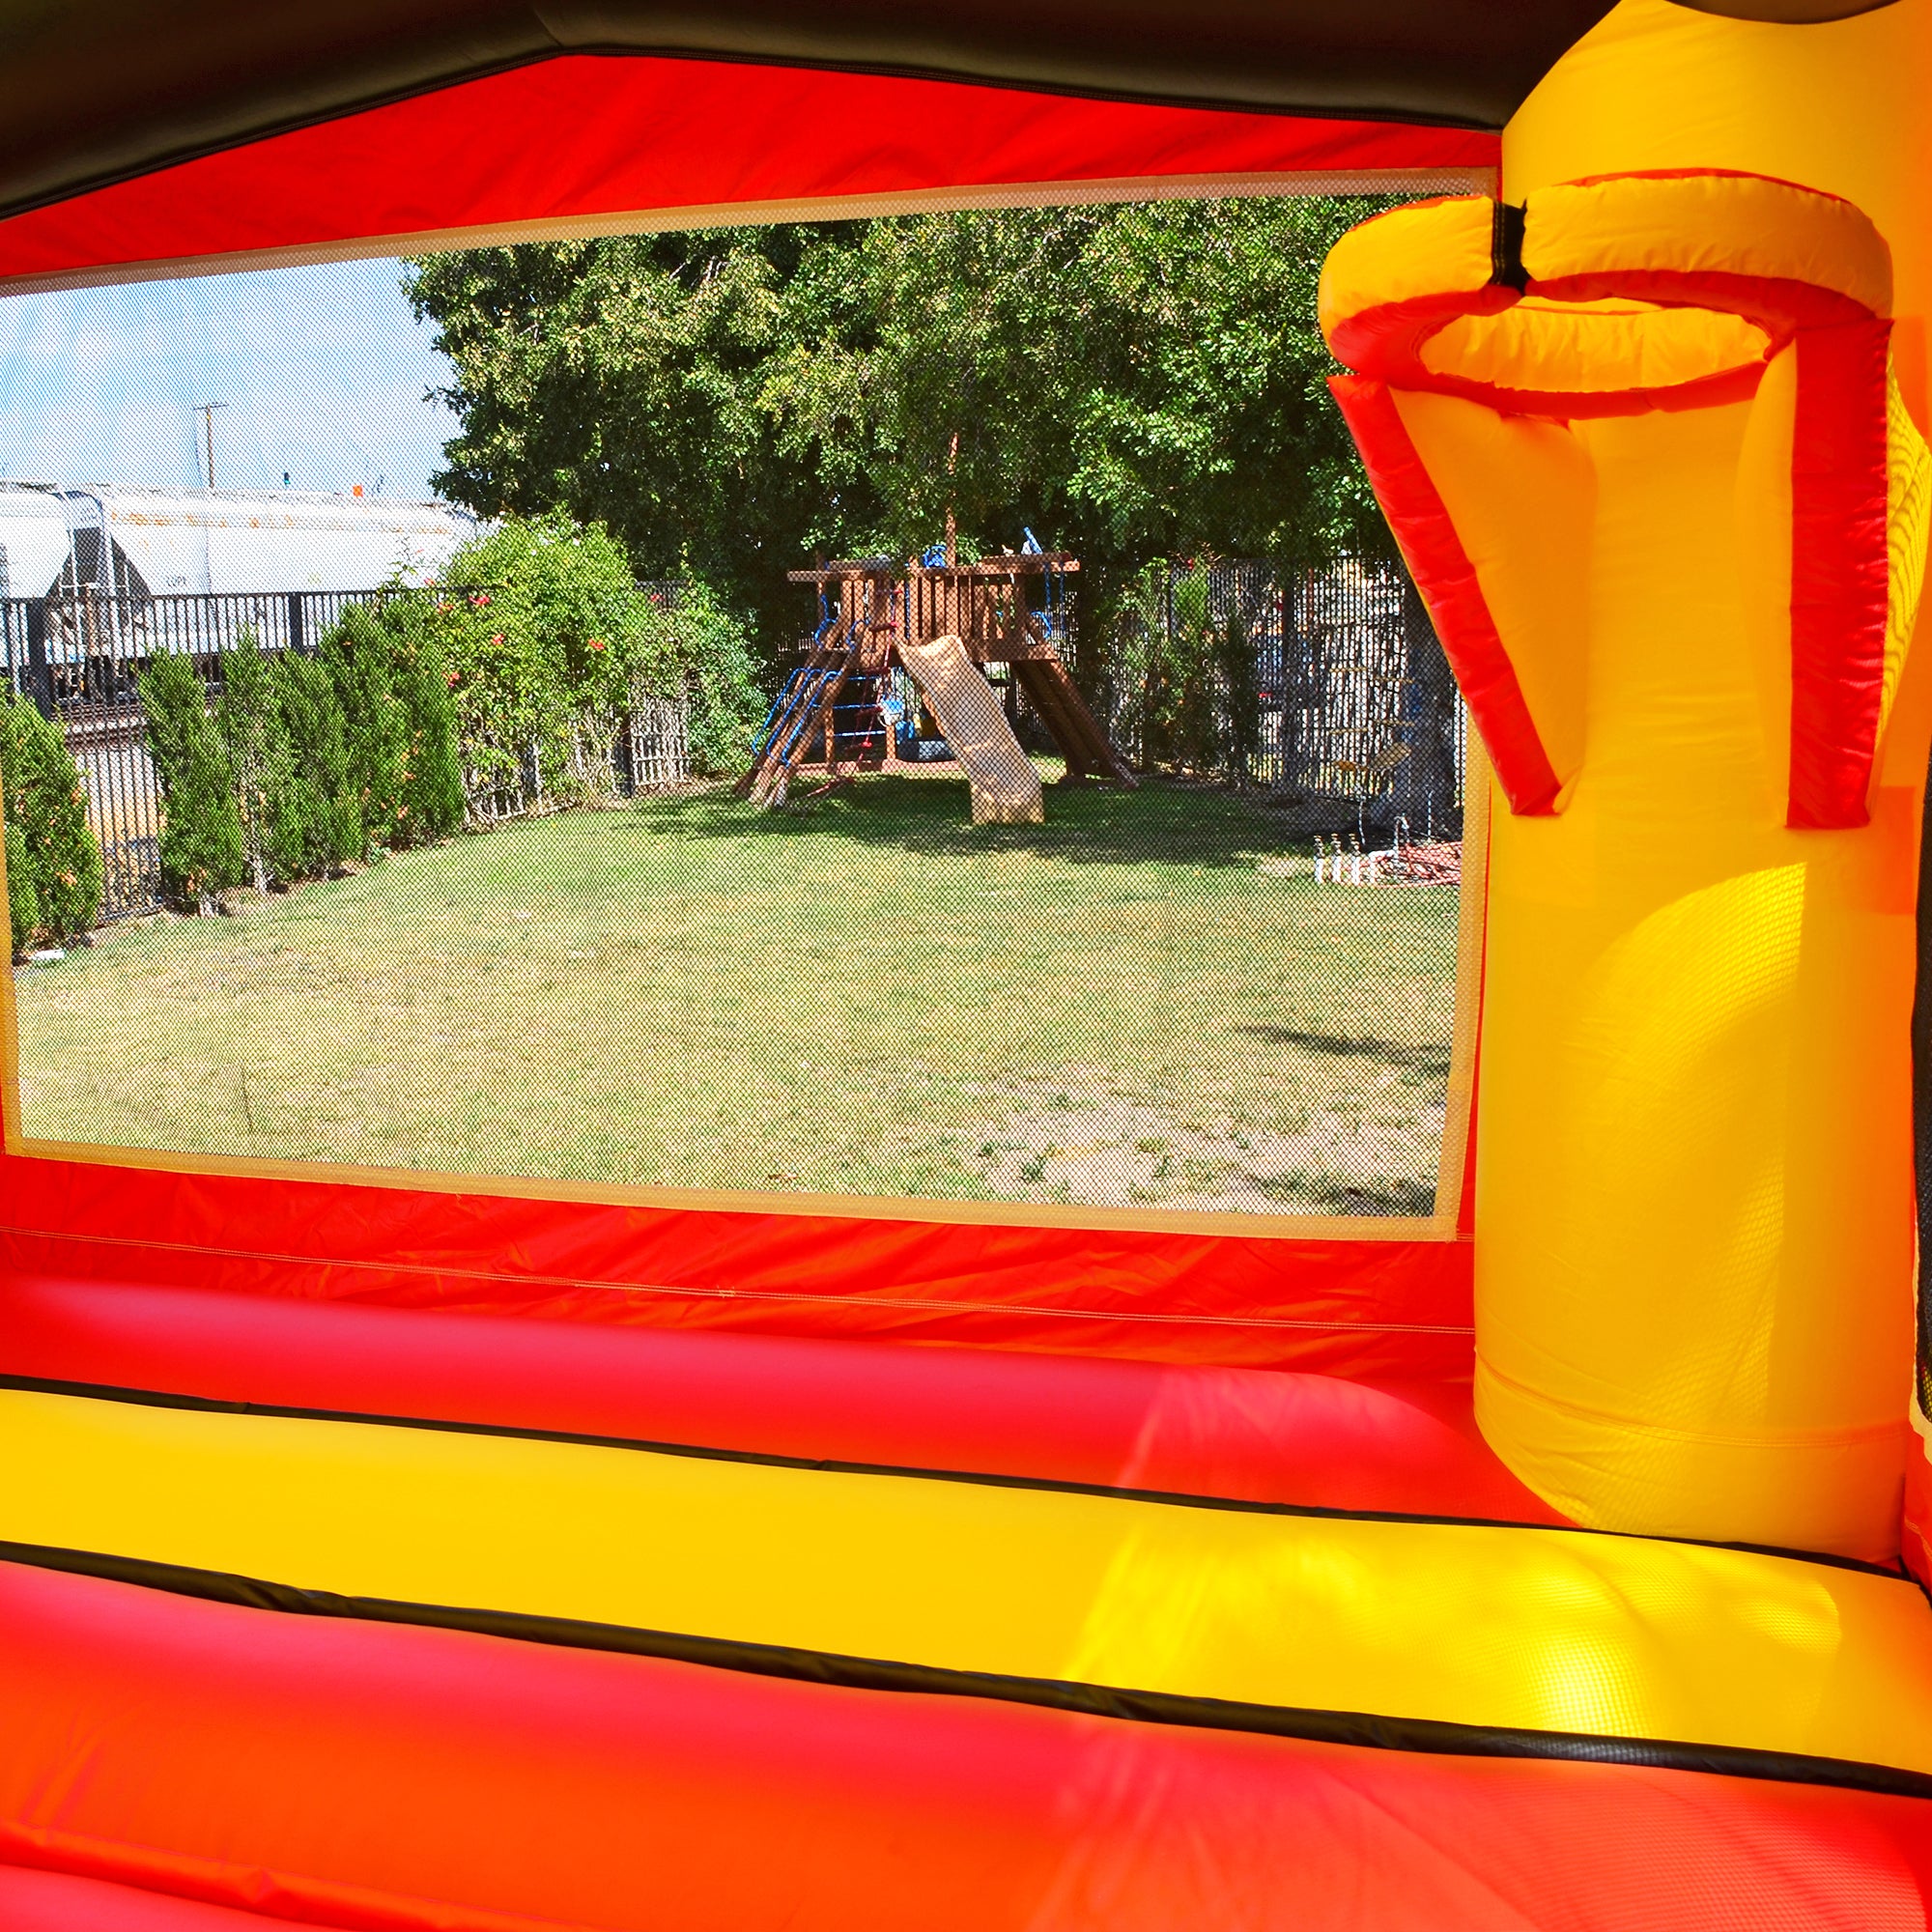 View through a bounce house window of a backyard playground and greenery.